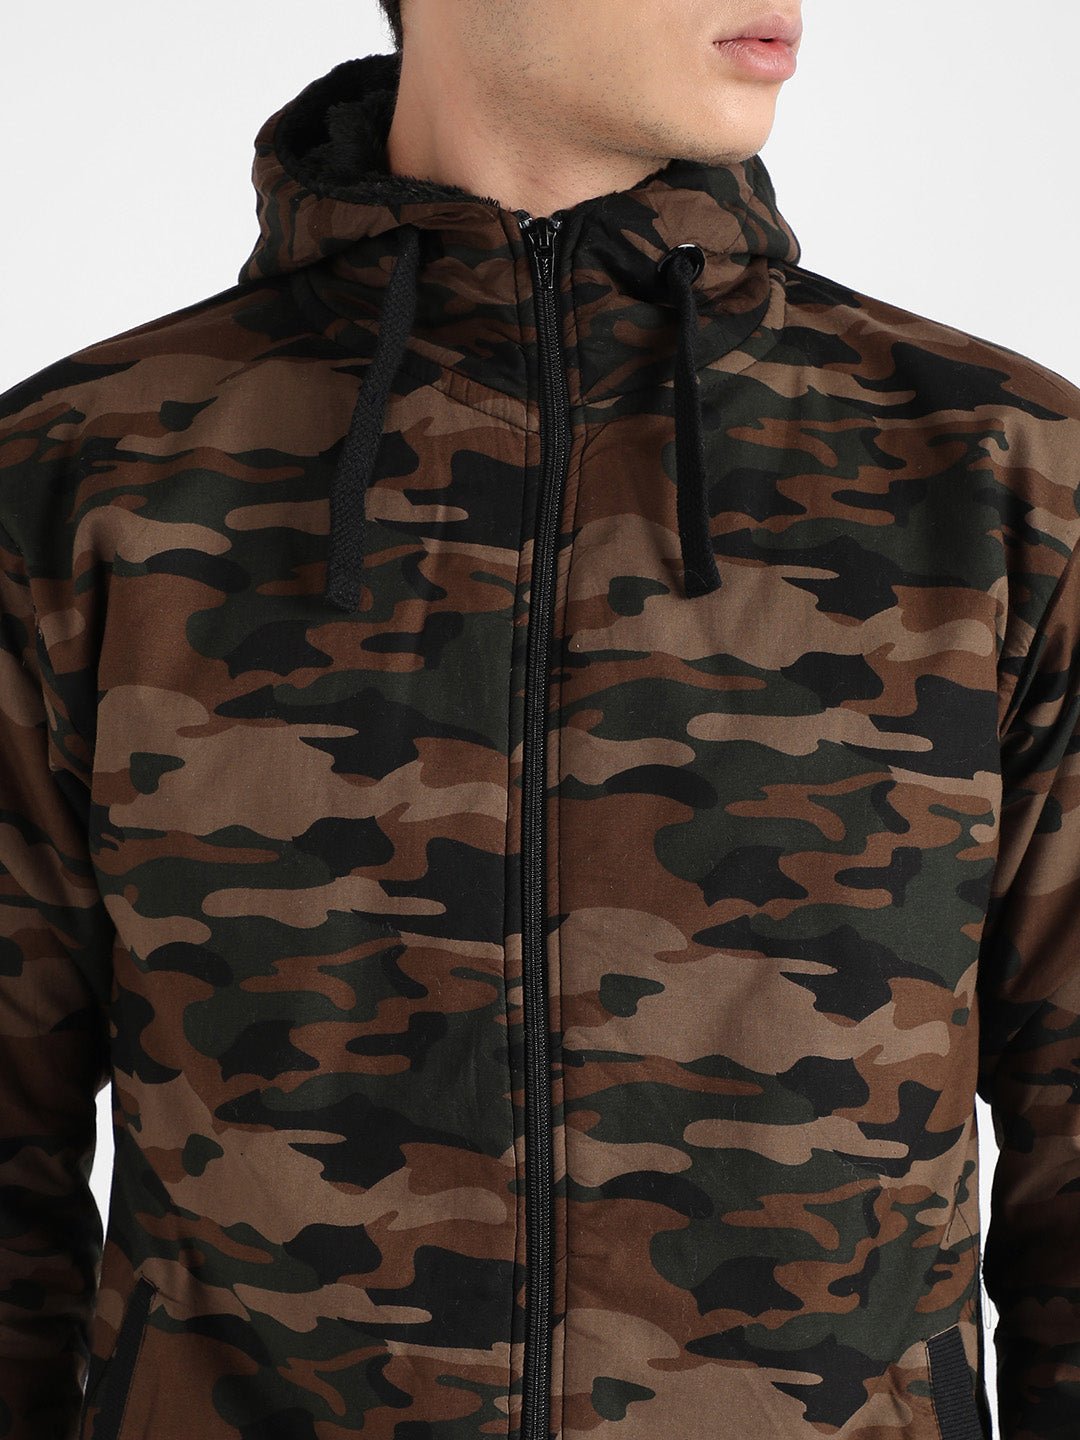 Men's Forest Green Camouflage Hoodie With Insert Pocket